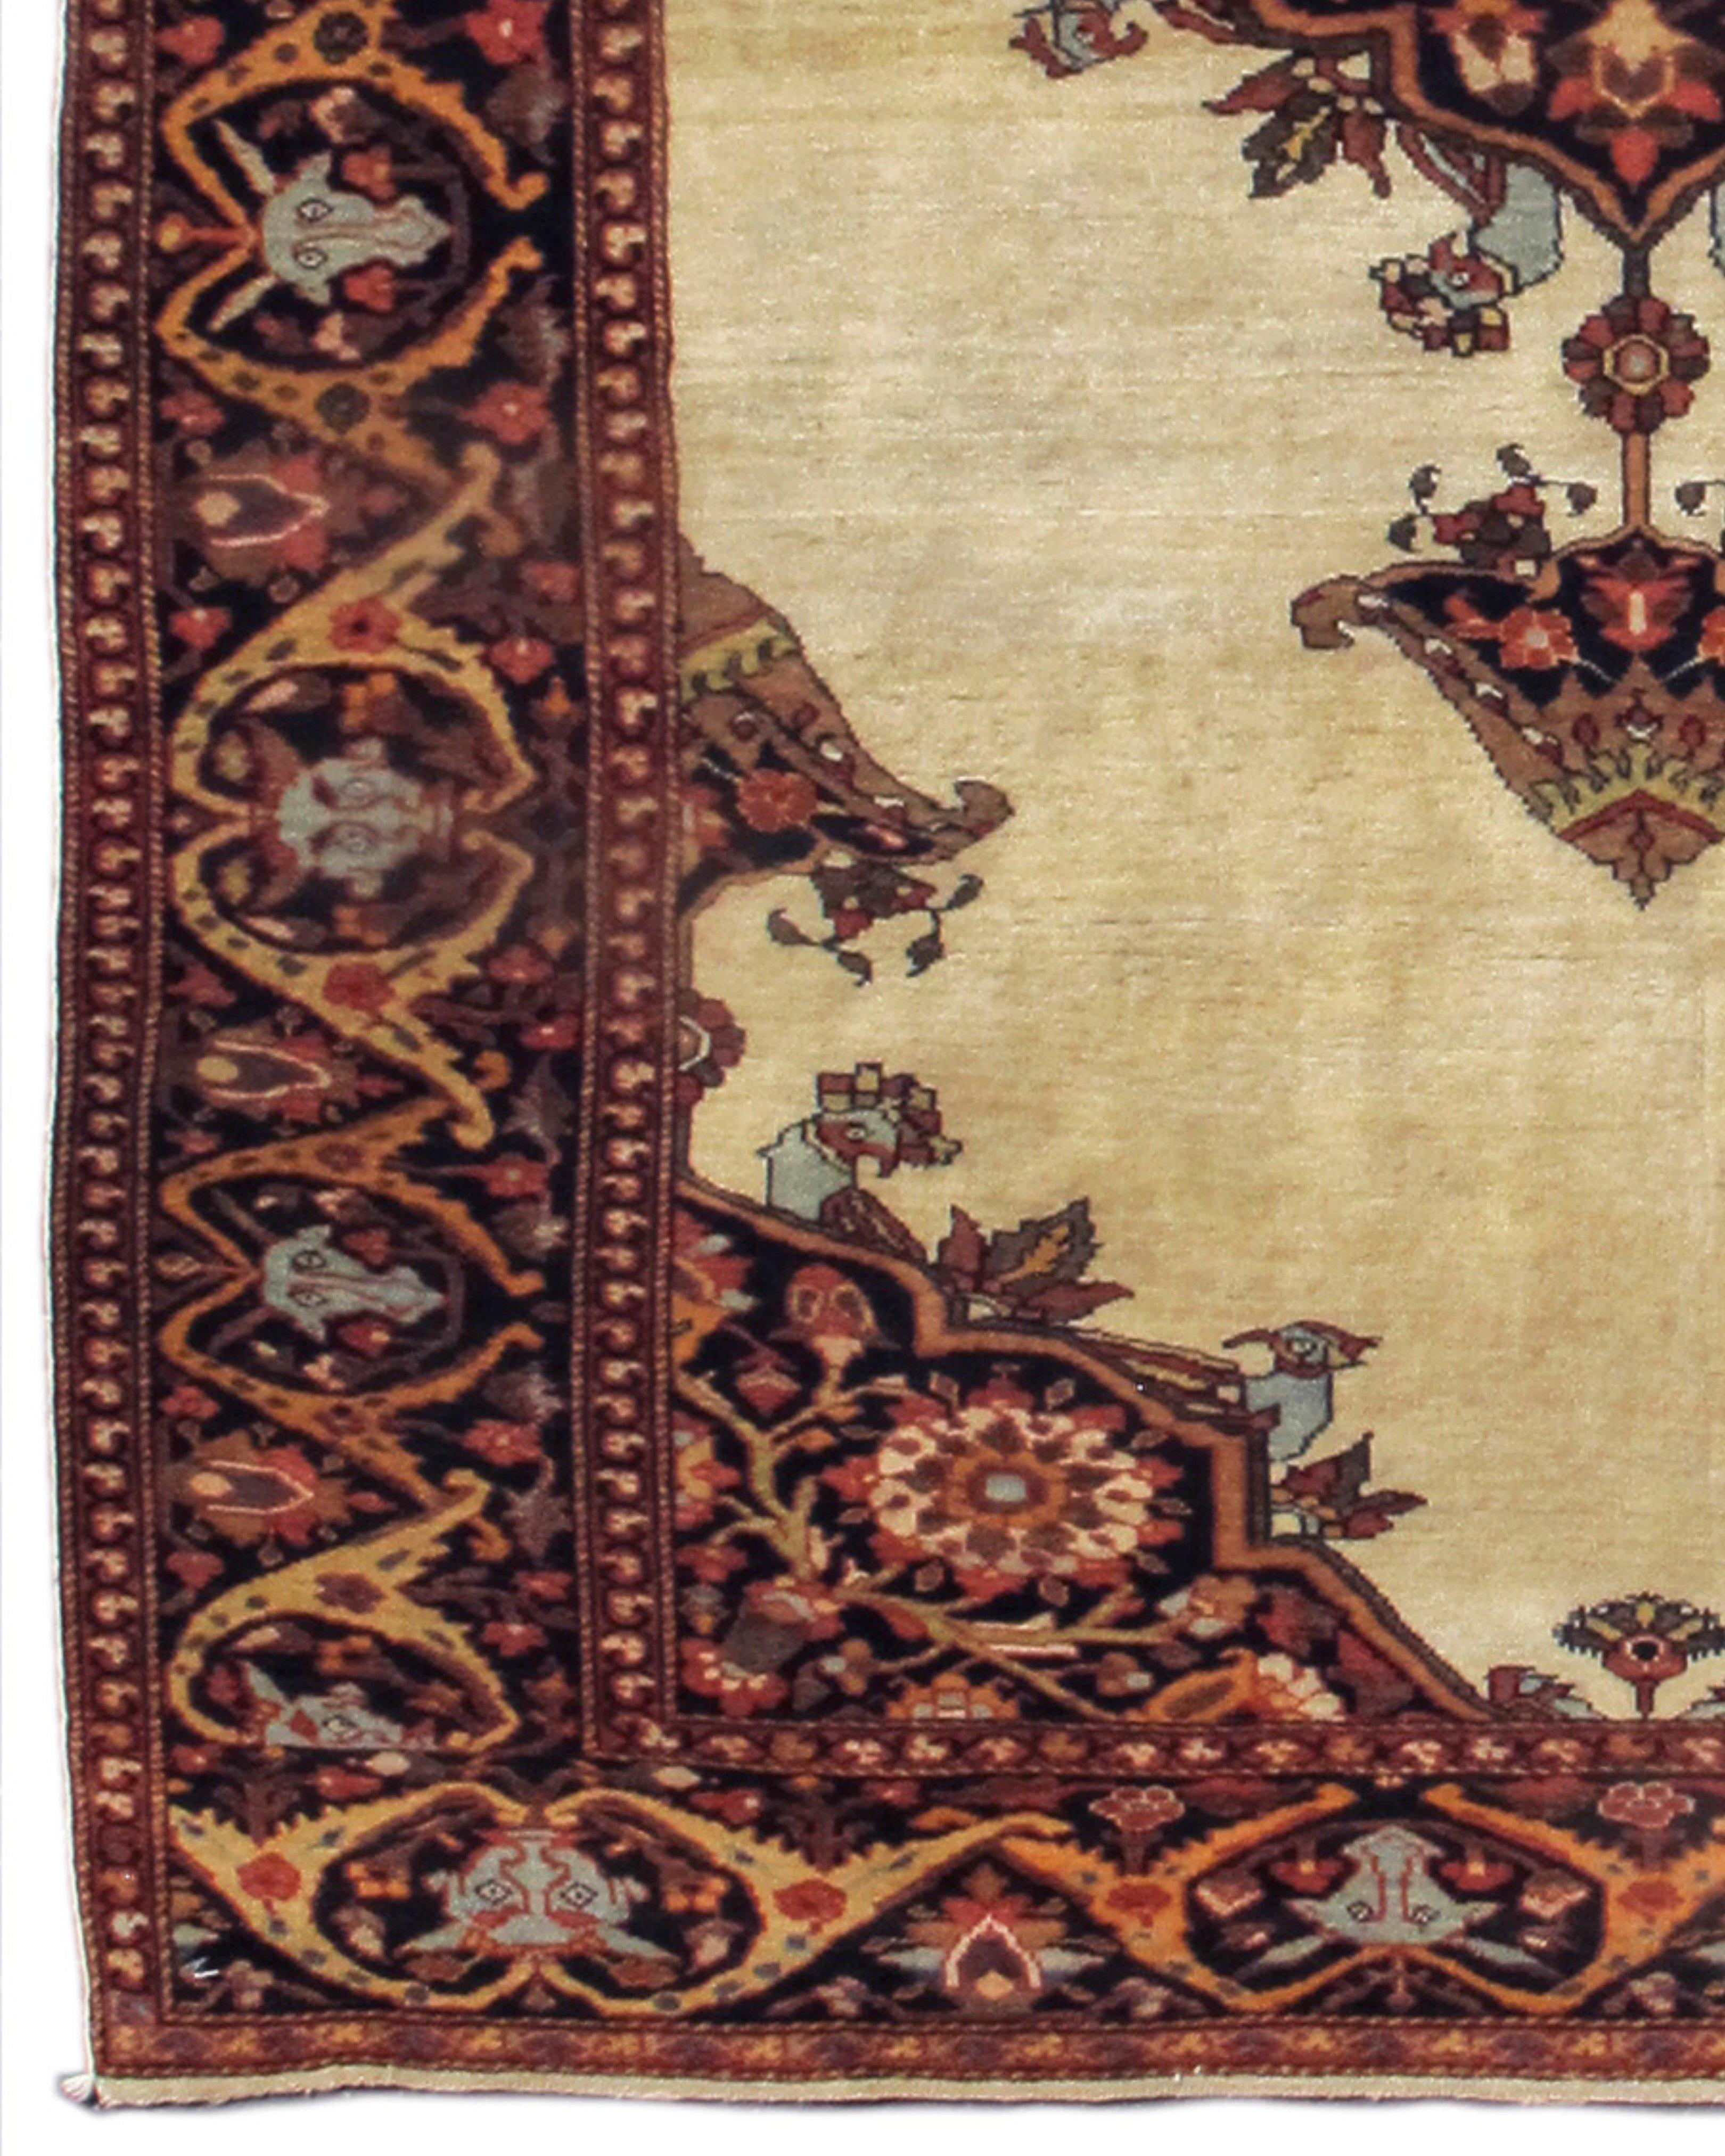 Antique Persian Fereghan Sarouk Rug, 19th Century In Good Condition For Sale In San Francisco, CA